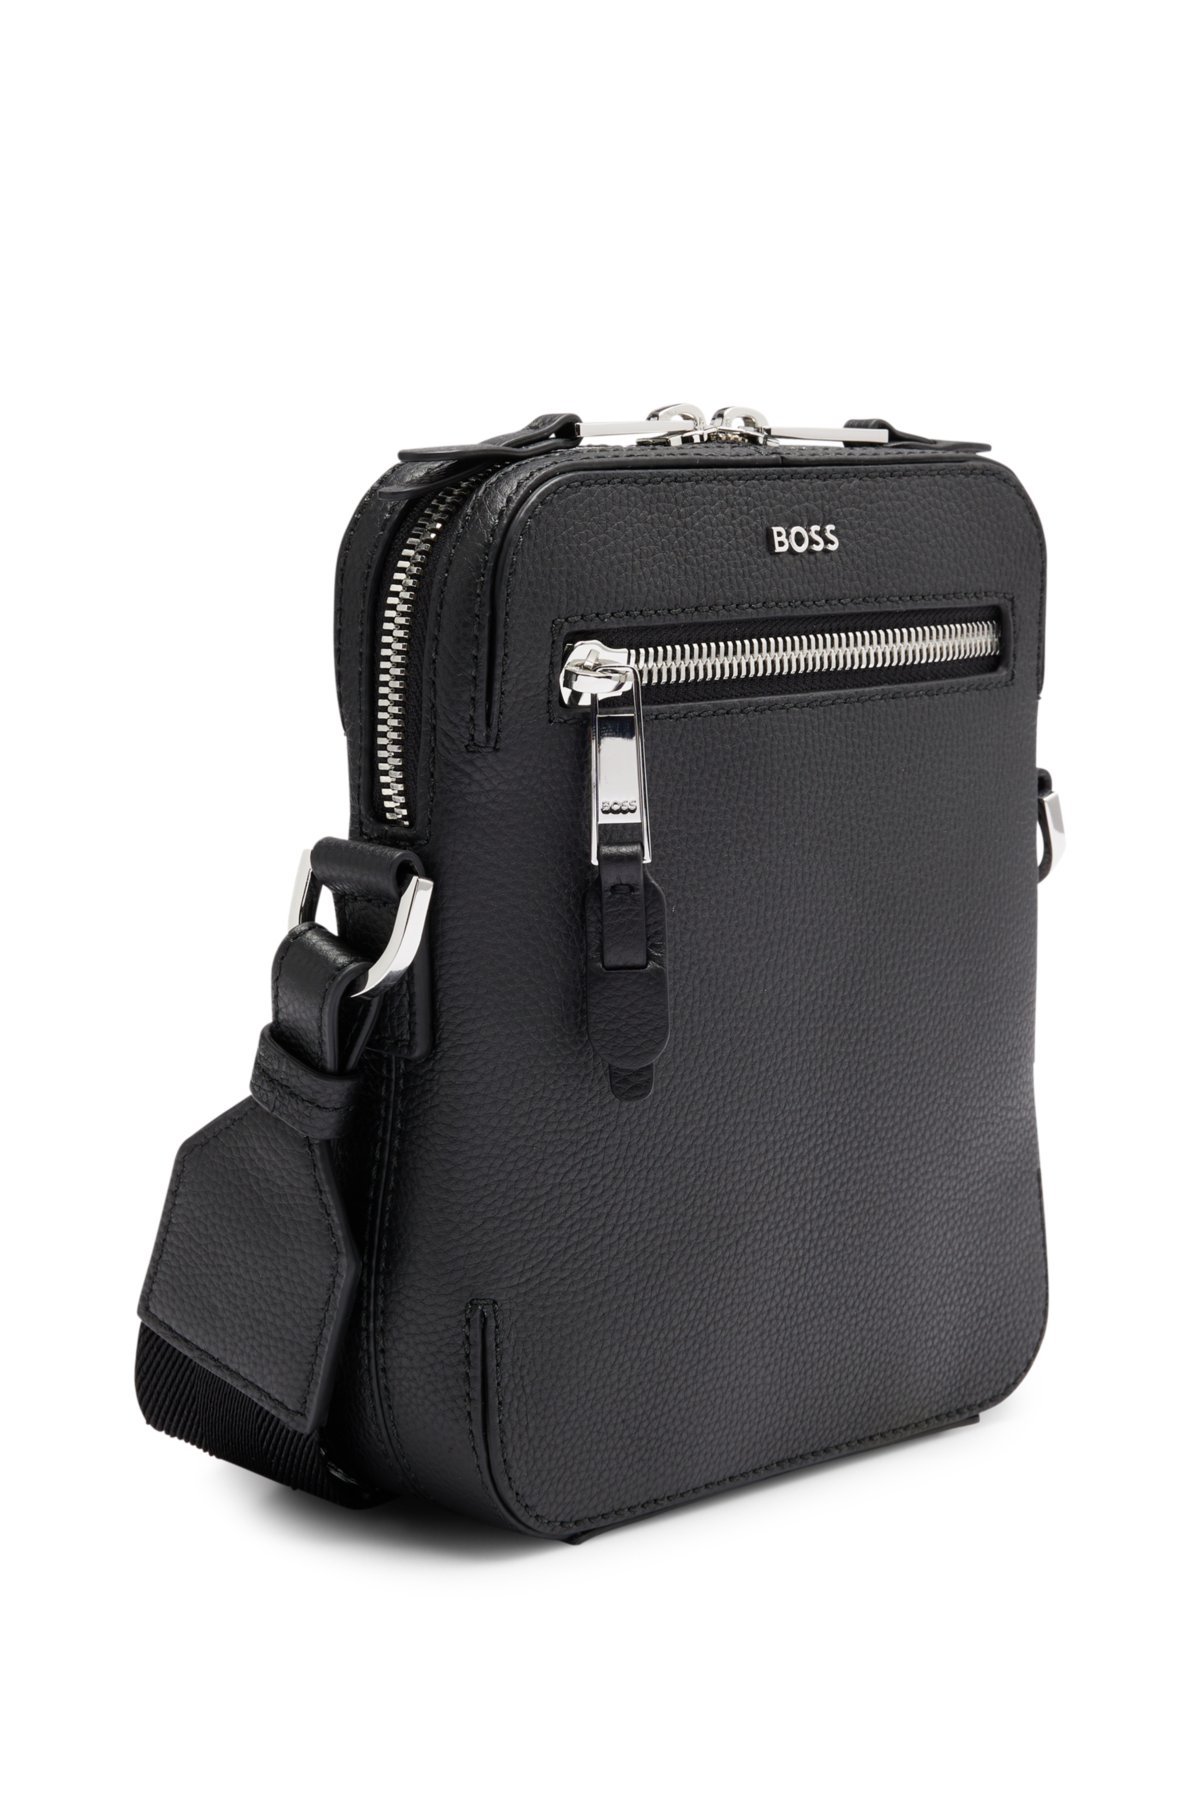 BOSS - Grained-leather reporter bag with metal logo lettering